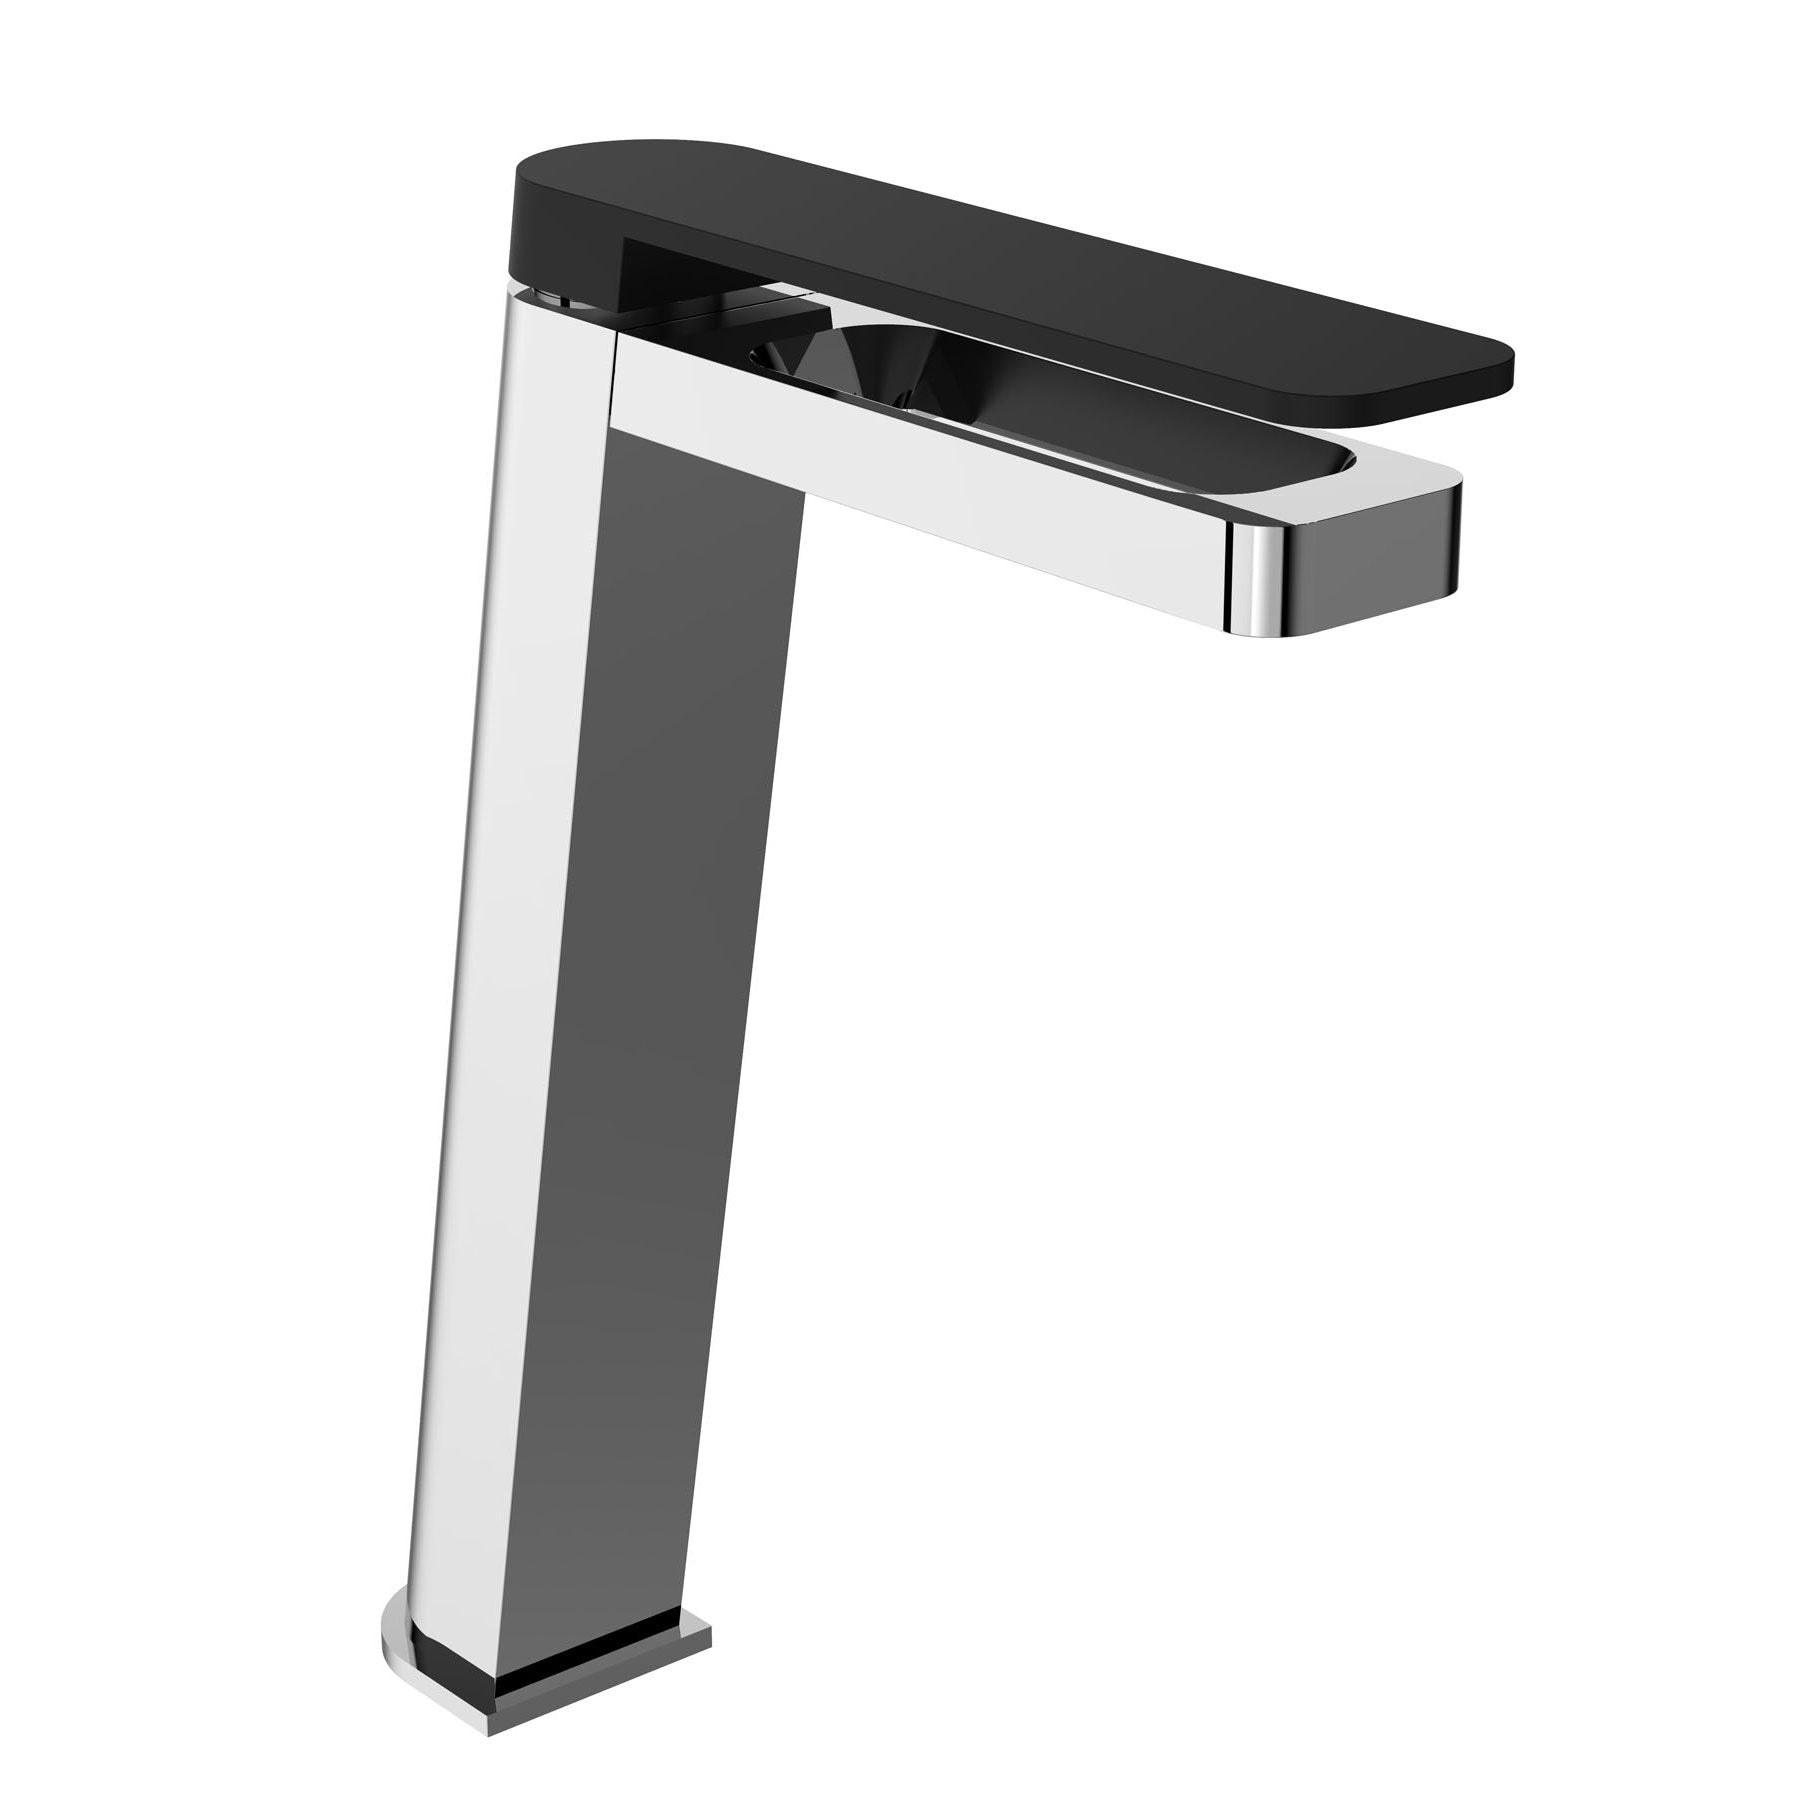 AXEL Modern Deck-Mounted Single Lever Tall Black Basin Tap with Chrome Finish